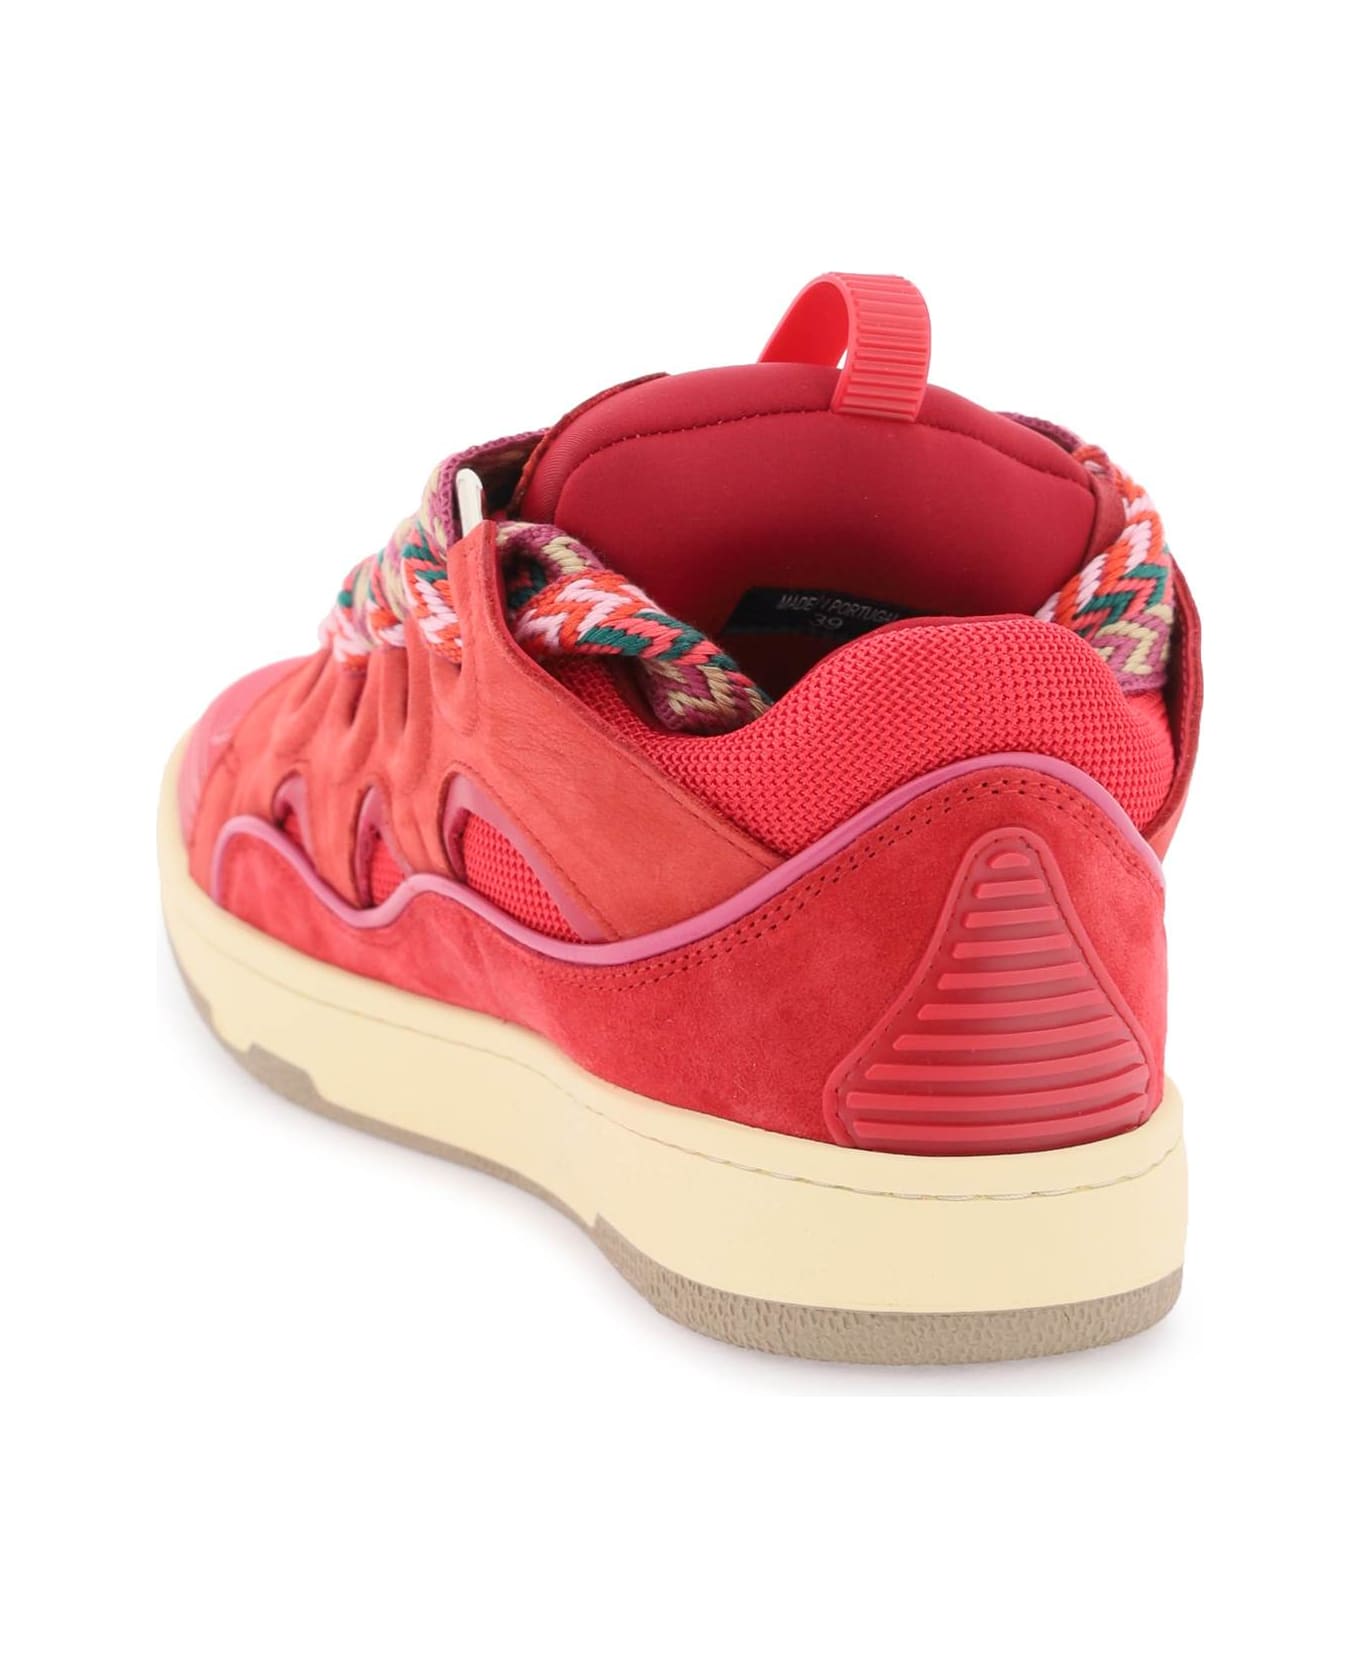 Lanvin Curb Sneakers In Fuxia Suede And Leather - Fuchsia